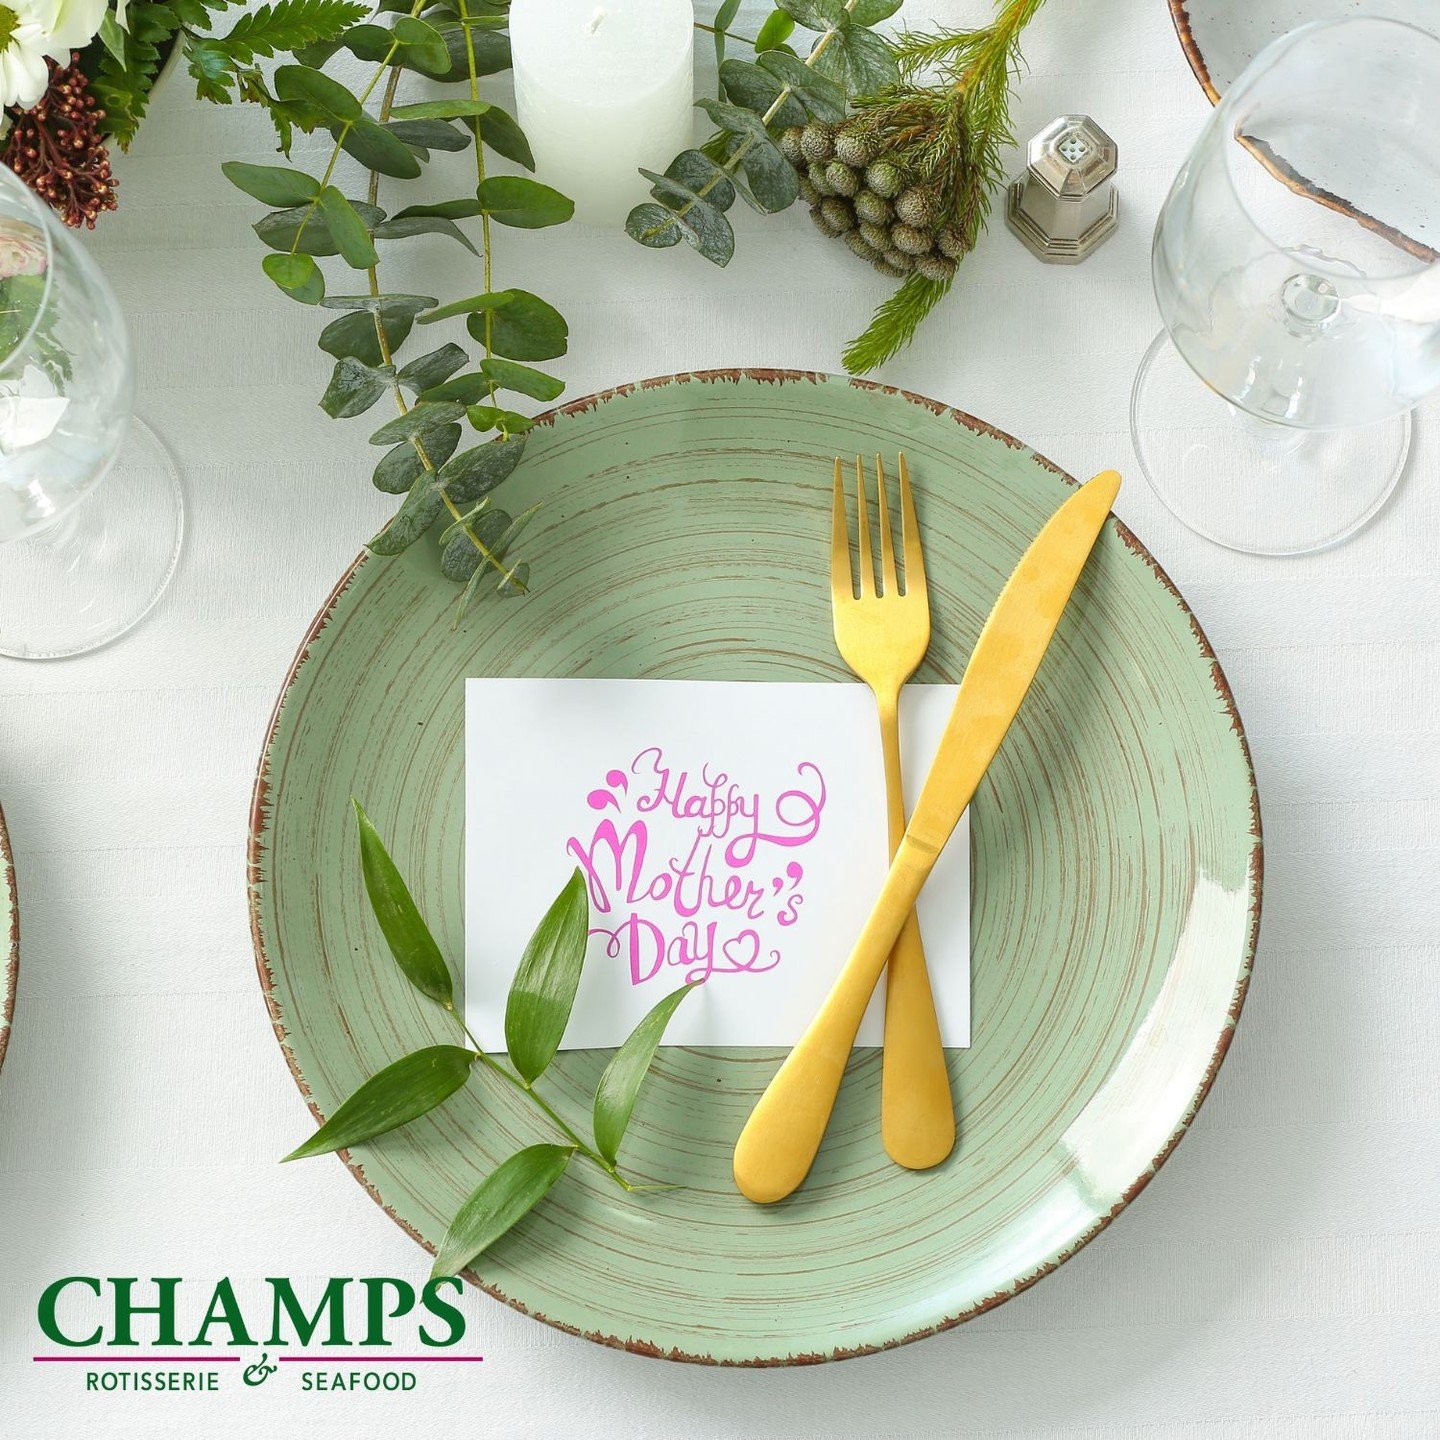 Celebrate Mother&rsquo;s Day at Champs on May 14th &mdash; let's make this day as special as she is!